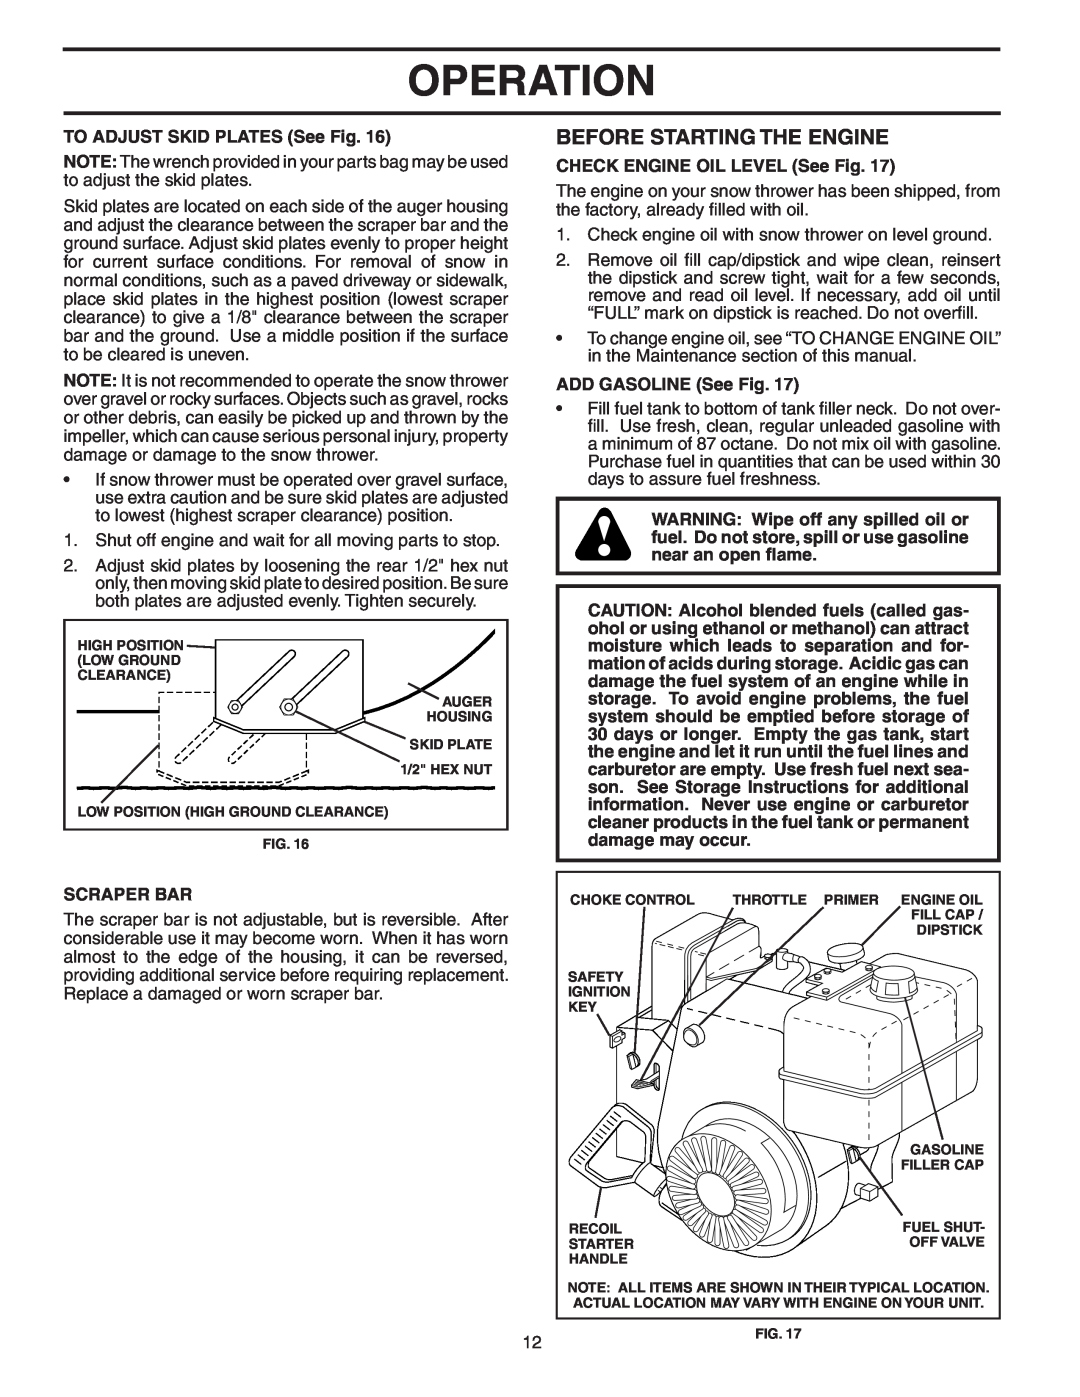 Poulan PP524A Before Starting The Engine, Operation, TO ADJUST SKID PLATES See Fig, CHECK ENGINE OIL LEVEL See Fig 